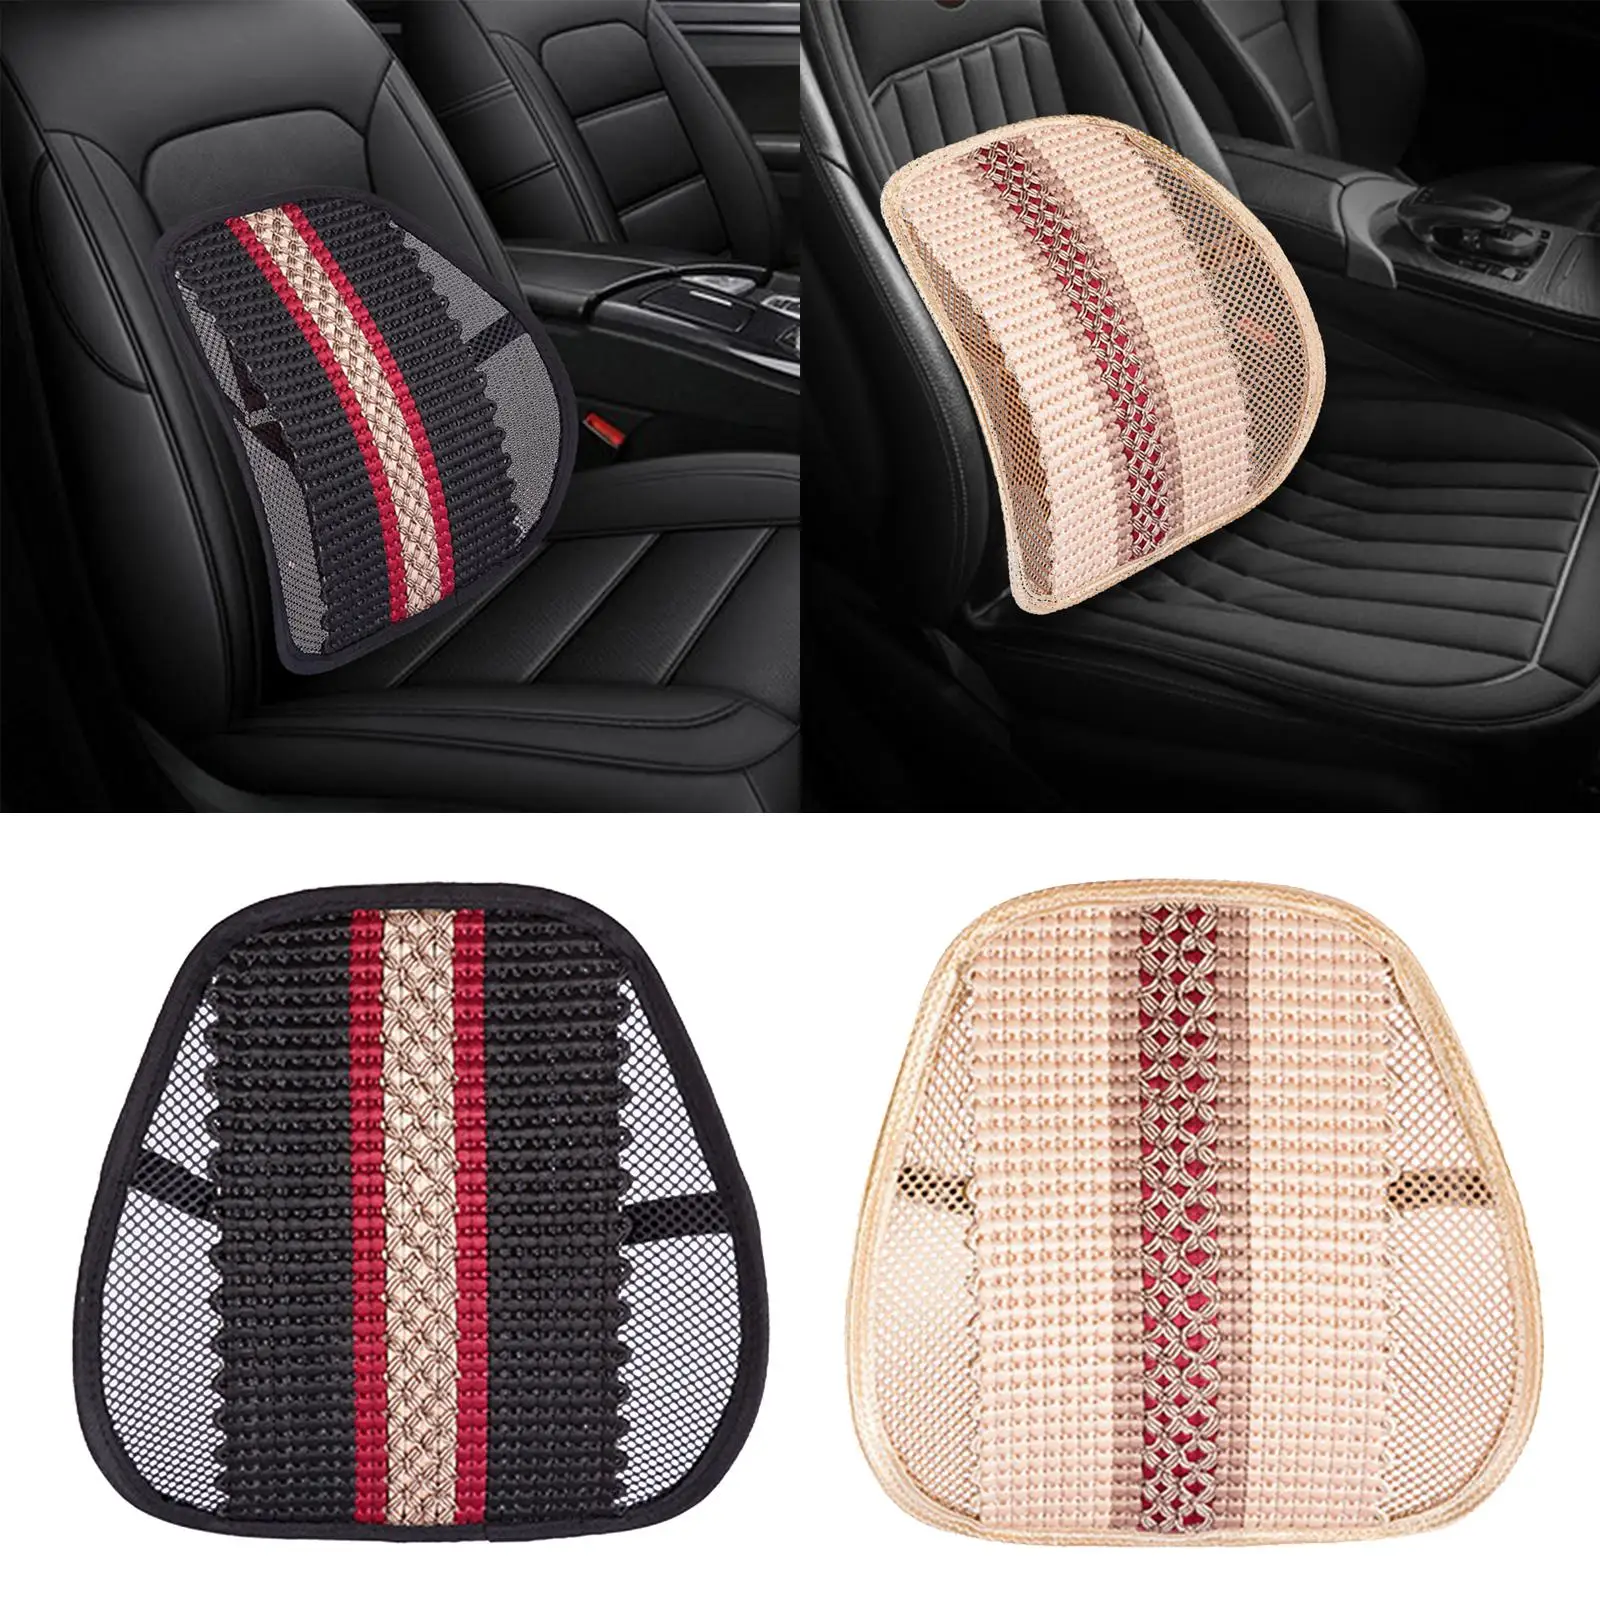 Lumbar Support Ergonomic Back Support Seat Cushion for Car Home Office Chair